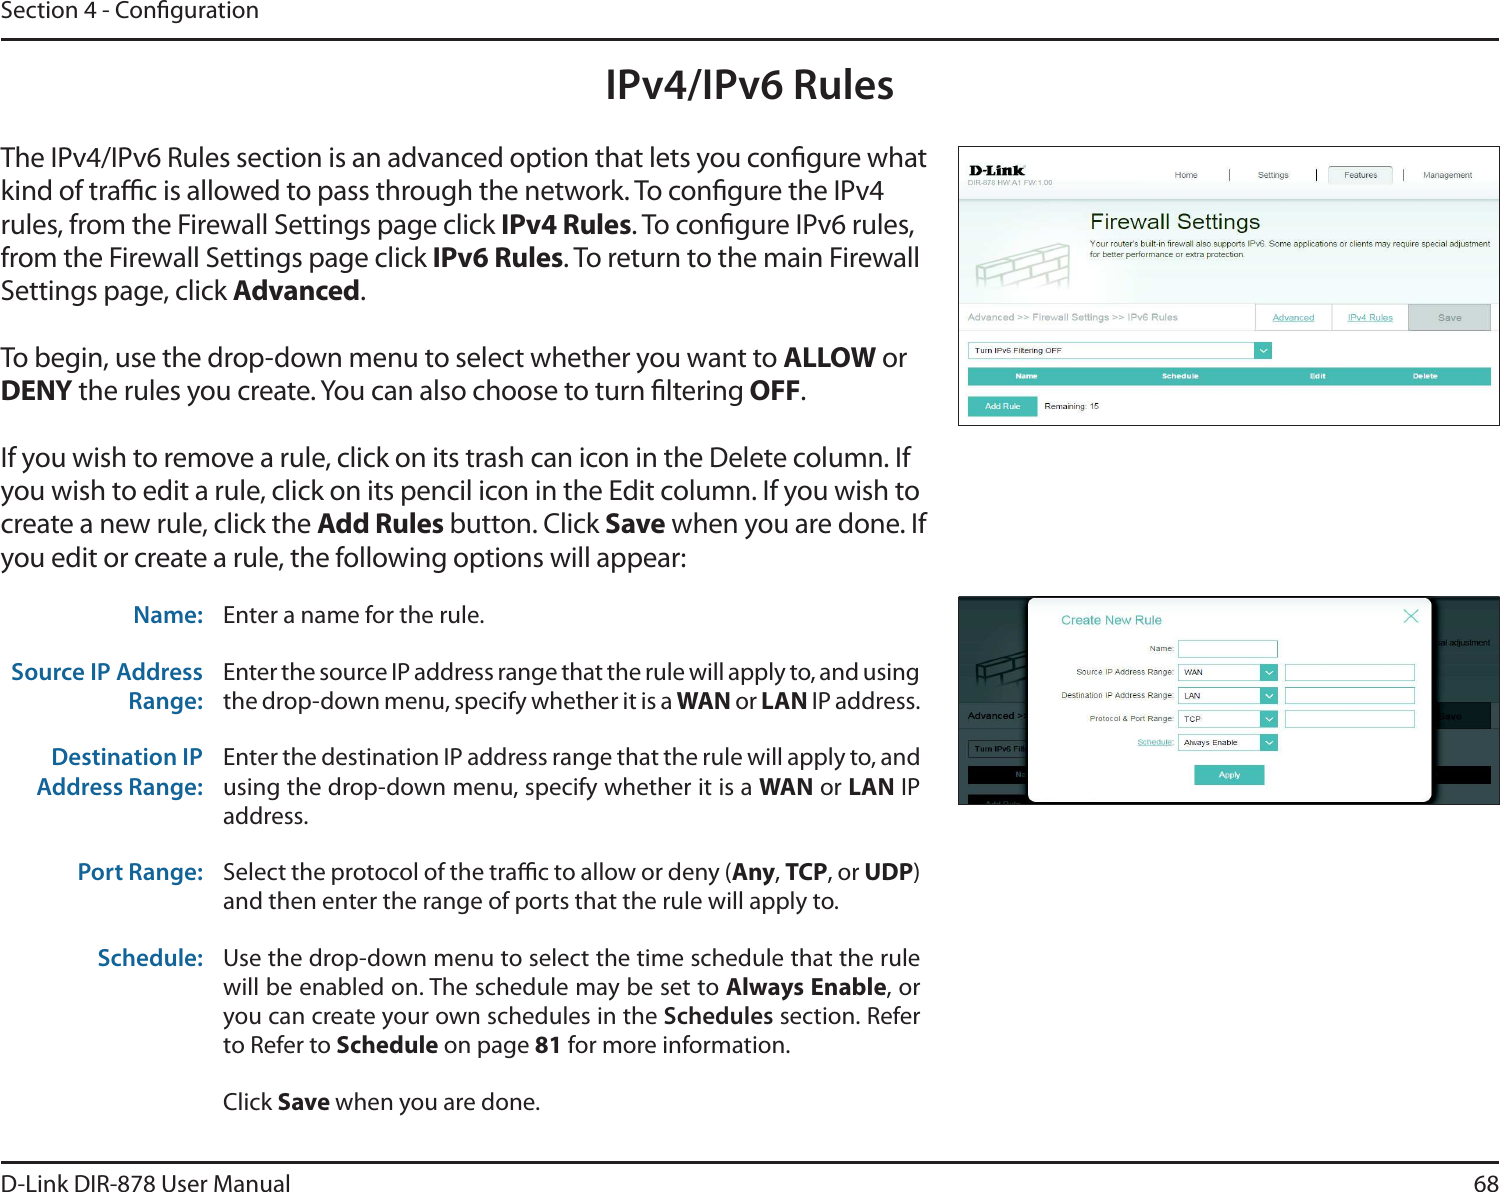 68D-Link DIR-878 User ManualSection 4 - CongurationIPv4/IPv6 RulesThe IPv4/IPv6 Rules section is an advanced option that lets you congure what kind of trac is allowed to pass through the network. To congure the IPv4 rules, from the Firewall Settings page click IPv4 Rules. To congure IPv6 rules, from the Firewall Settings page click IPv6 Rules. To return to the main Firewall Settings page, click &quot;EWBODFE.To begin, use the drop-down menu to select whether you want to &quot;--08 or %&amp;/: the rules you create. You can also choose to turn ltering 0&apos;&apos;.If you wish to remove a rule, click on its trash can icon in the Delete column. If you wish to edit a rule, click on its pencil icon in the Edit column. If you wish to create a new rule, click the &quot;EE3VMFTbutton. Click Save when you are done. If you edit or create a rule, the following options will appear:Name: Enter a name for the rule.Source IP Address Range:Enter the source IP address range that the rule will apply to, and using the drop-down menu, specify whether it is a 8&quot;/ or -&quot;/ IP address.Destination IP Address Range:Enter the destination IP address range that the rule will apply to, and using the drop-down menu, specify whether it is a 8&quot;/ or -&quot;/ IP address.Port Range: Select the protocol of the trac to allow or deny (&quot;OZ,TCP, or UDP)and then enter the range of ports that the rule will apply to.Schedule: Use the drop-down menu to select the time schedule that the rule will be enabled on. The schedule may be set to &quot;MXBZT&amp;OBCMF, or you can create your own schedules in the Schedules section. Refer to Refer to Schedule on page 81 for more information.Click Save when you are done.